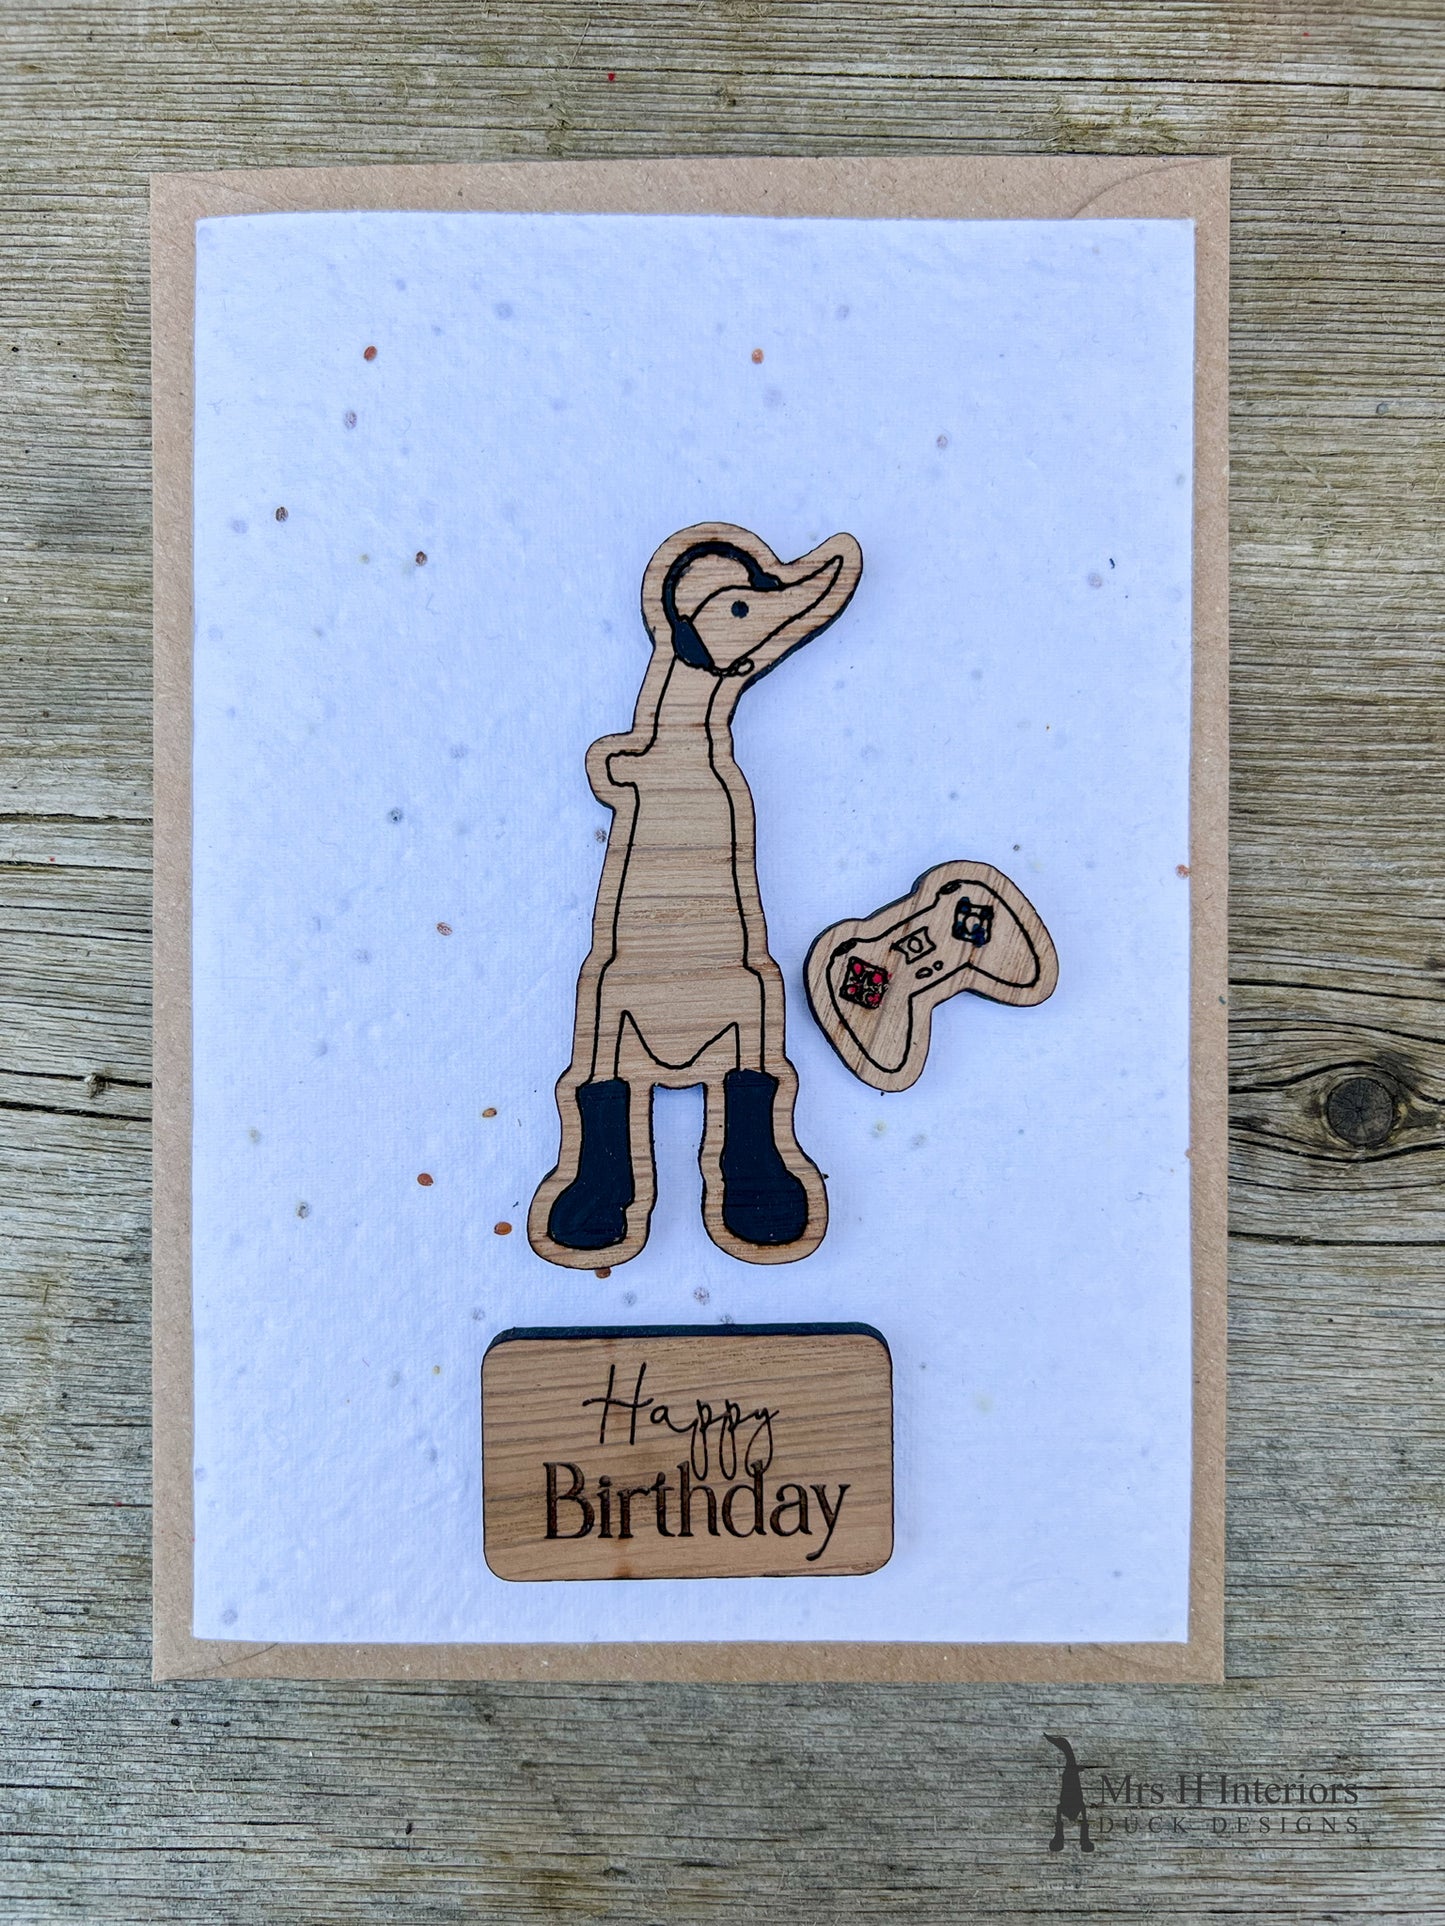 Gaming Duck - Birthday or Father’s Day Card - Decorated Wooden Duck in Boots by Mrs H the Duck Lady